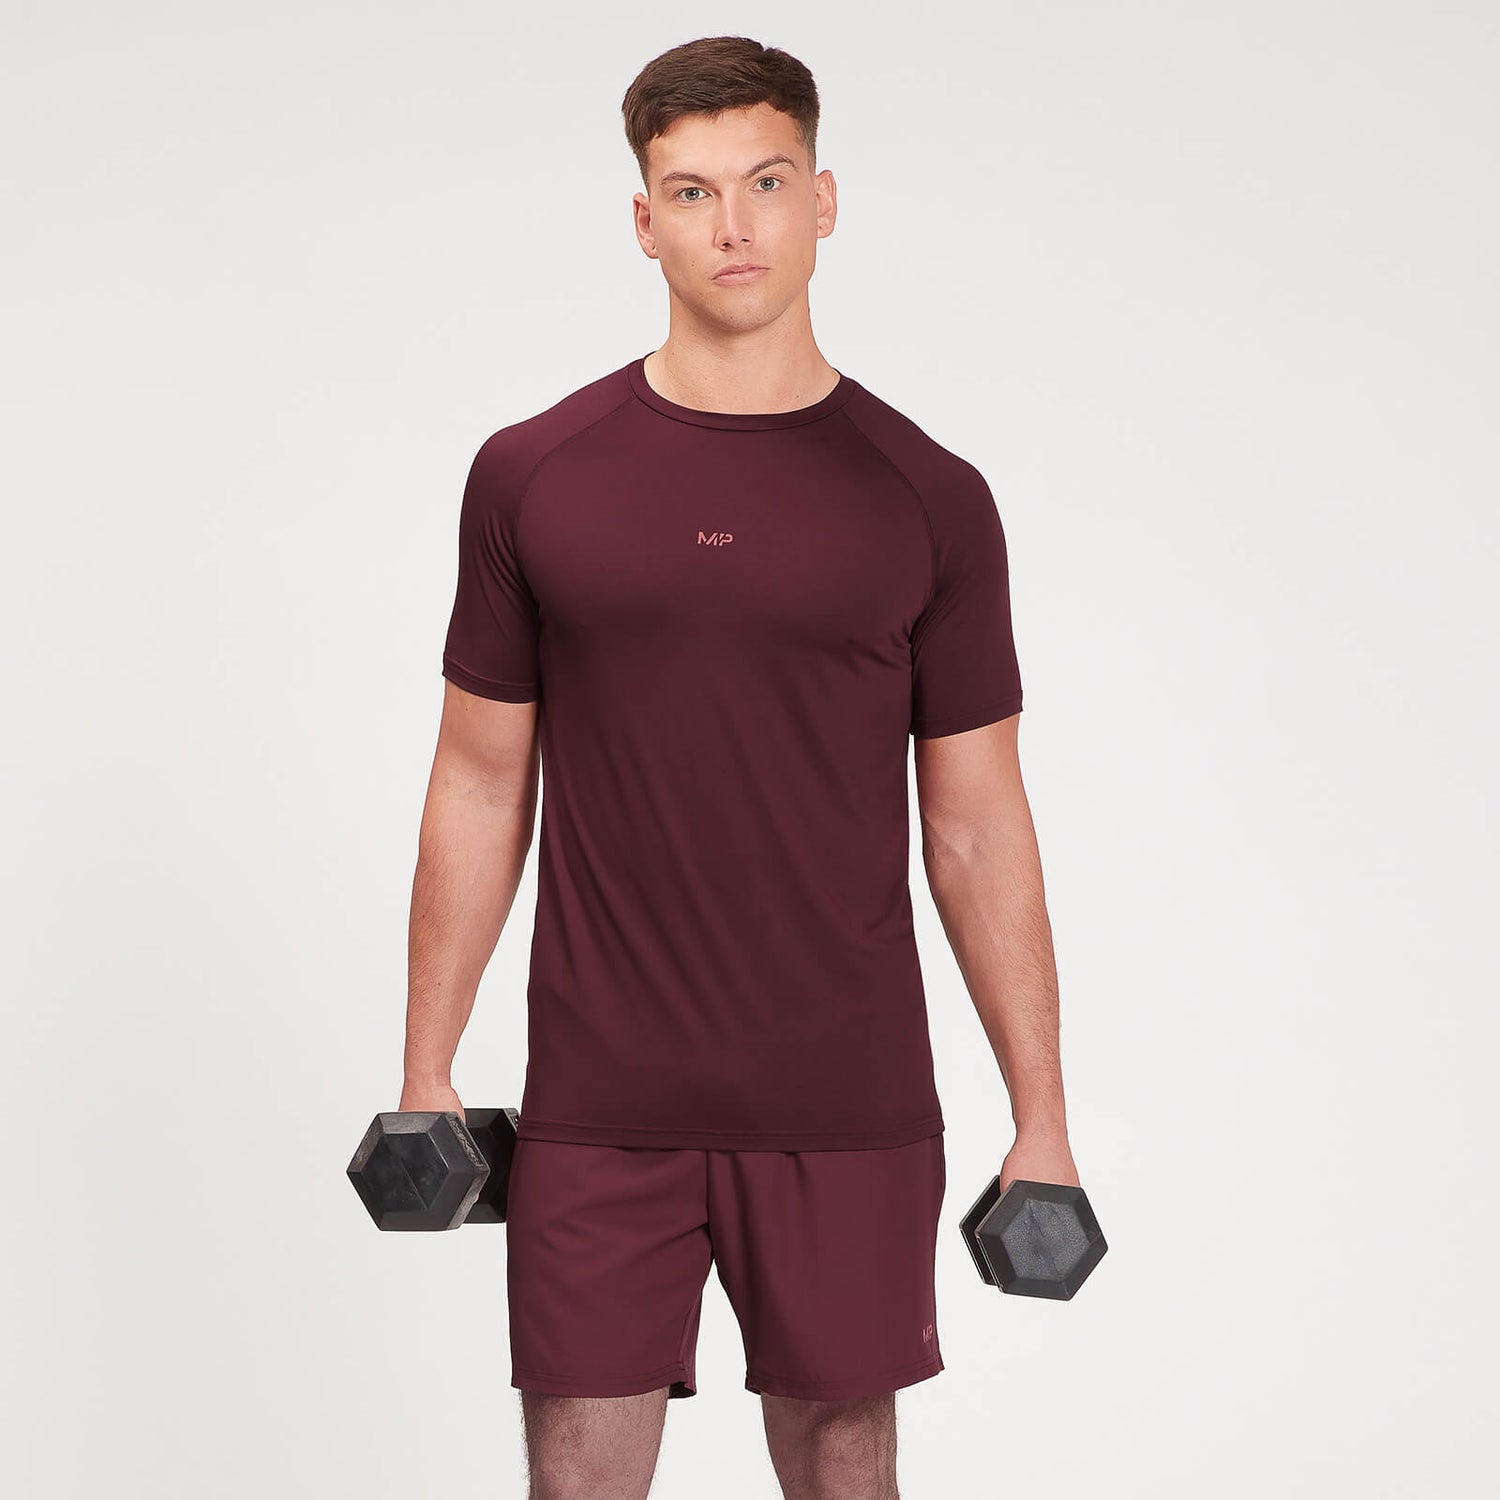 MP Men's Fade Graphic Training Short Sleeve T-Shirt - Washed Oxblood - XXS